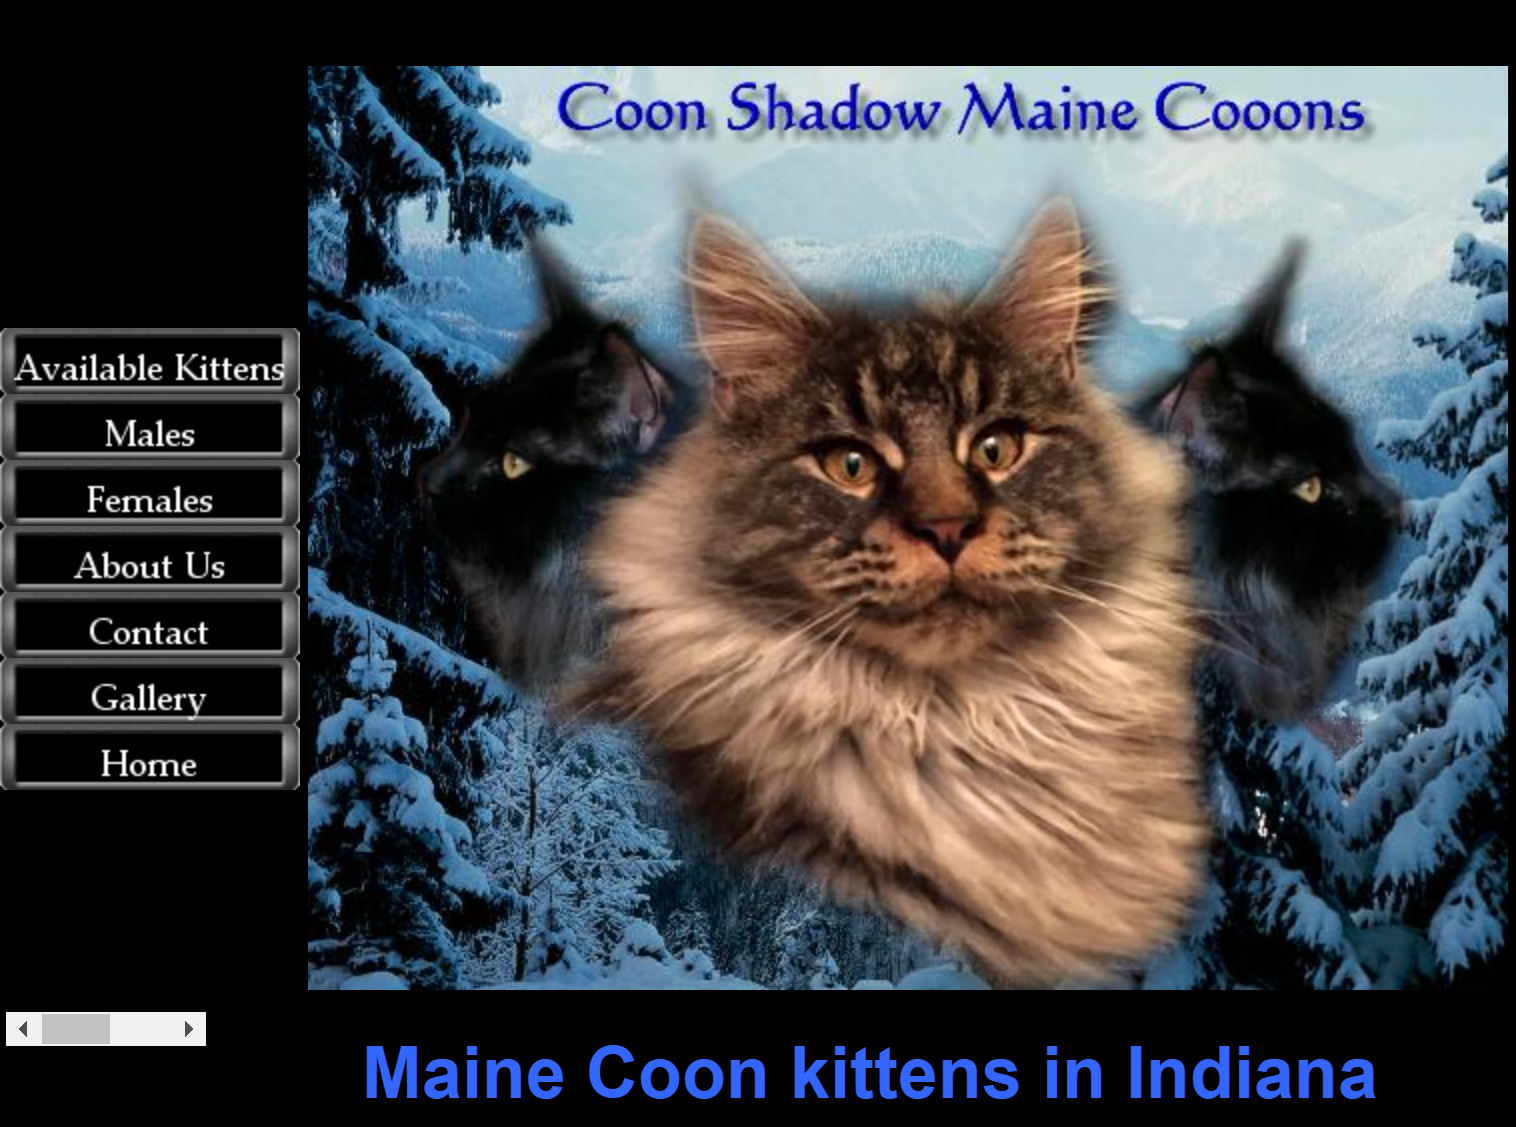 coon shadow maine coons